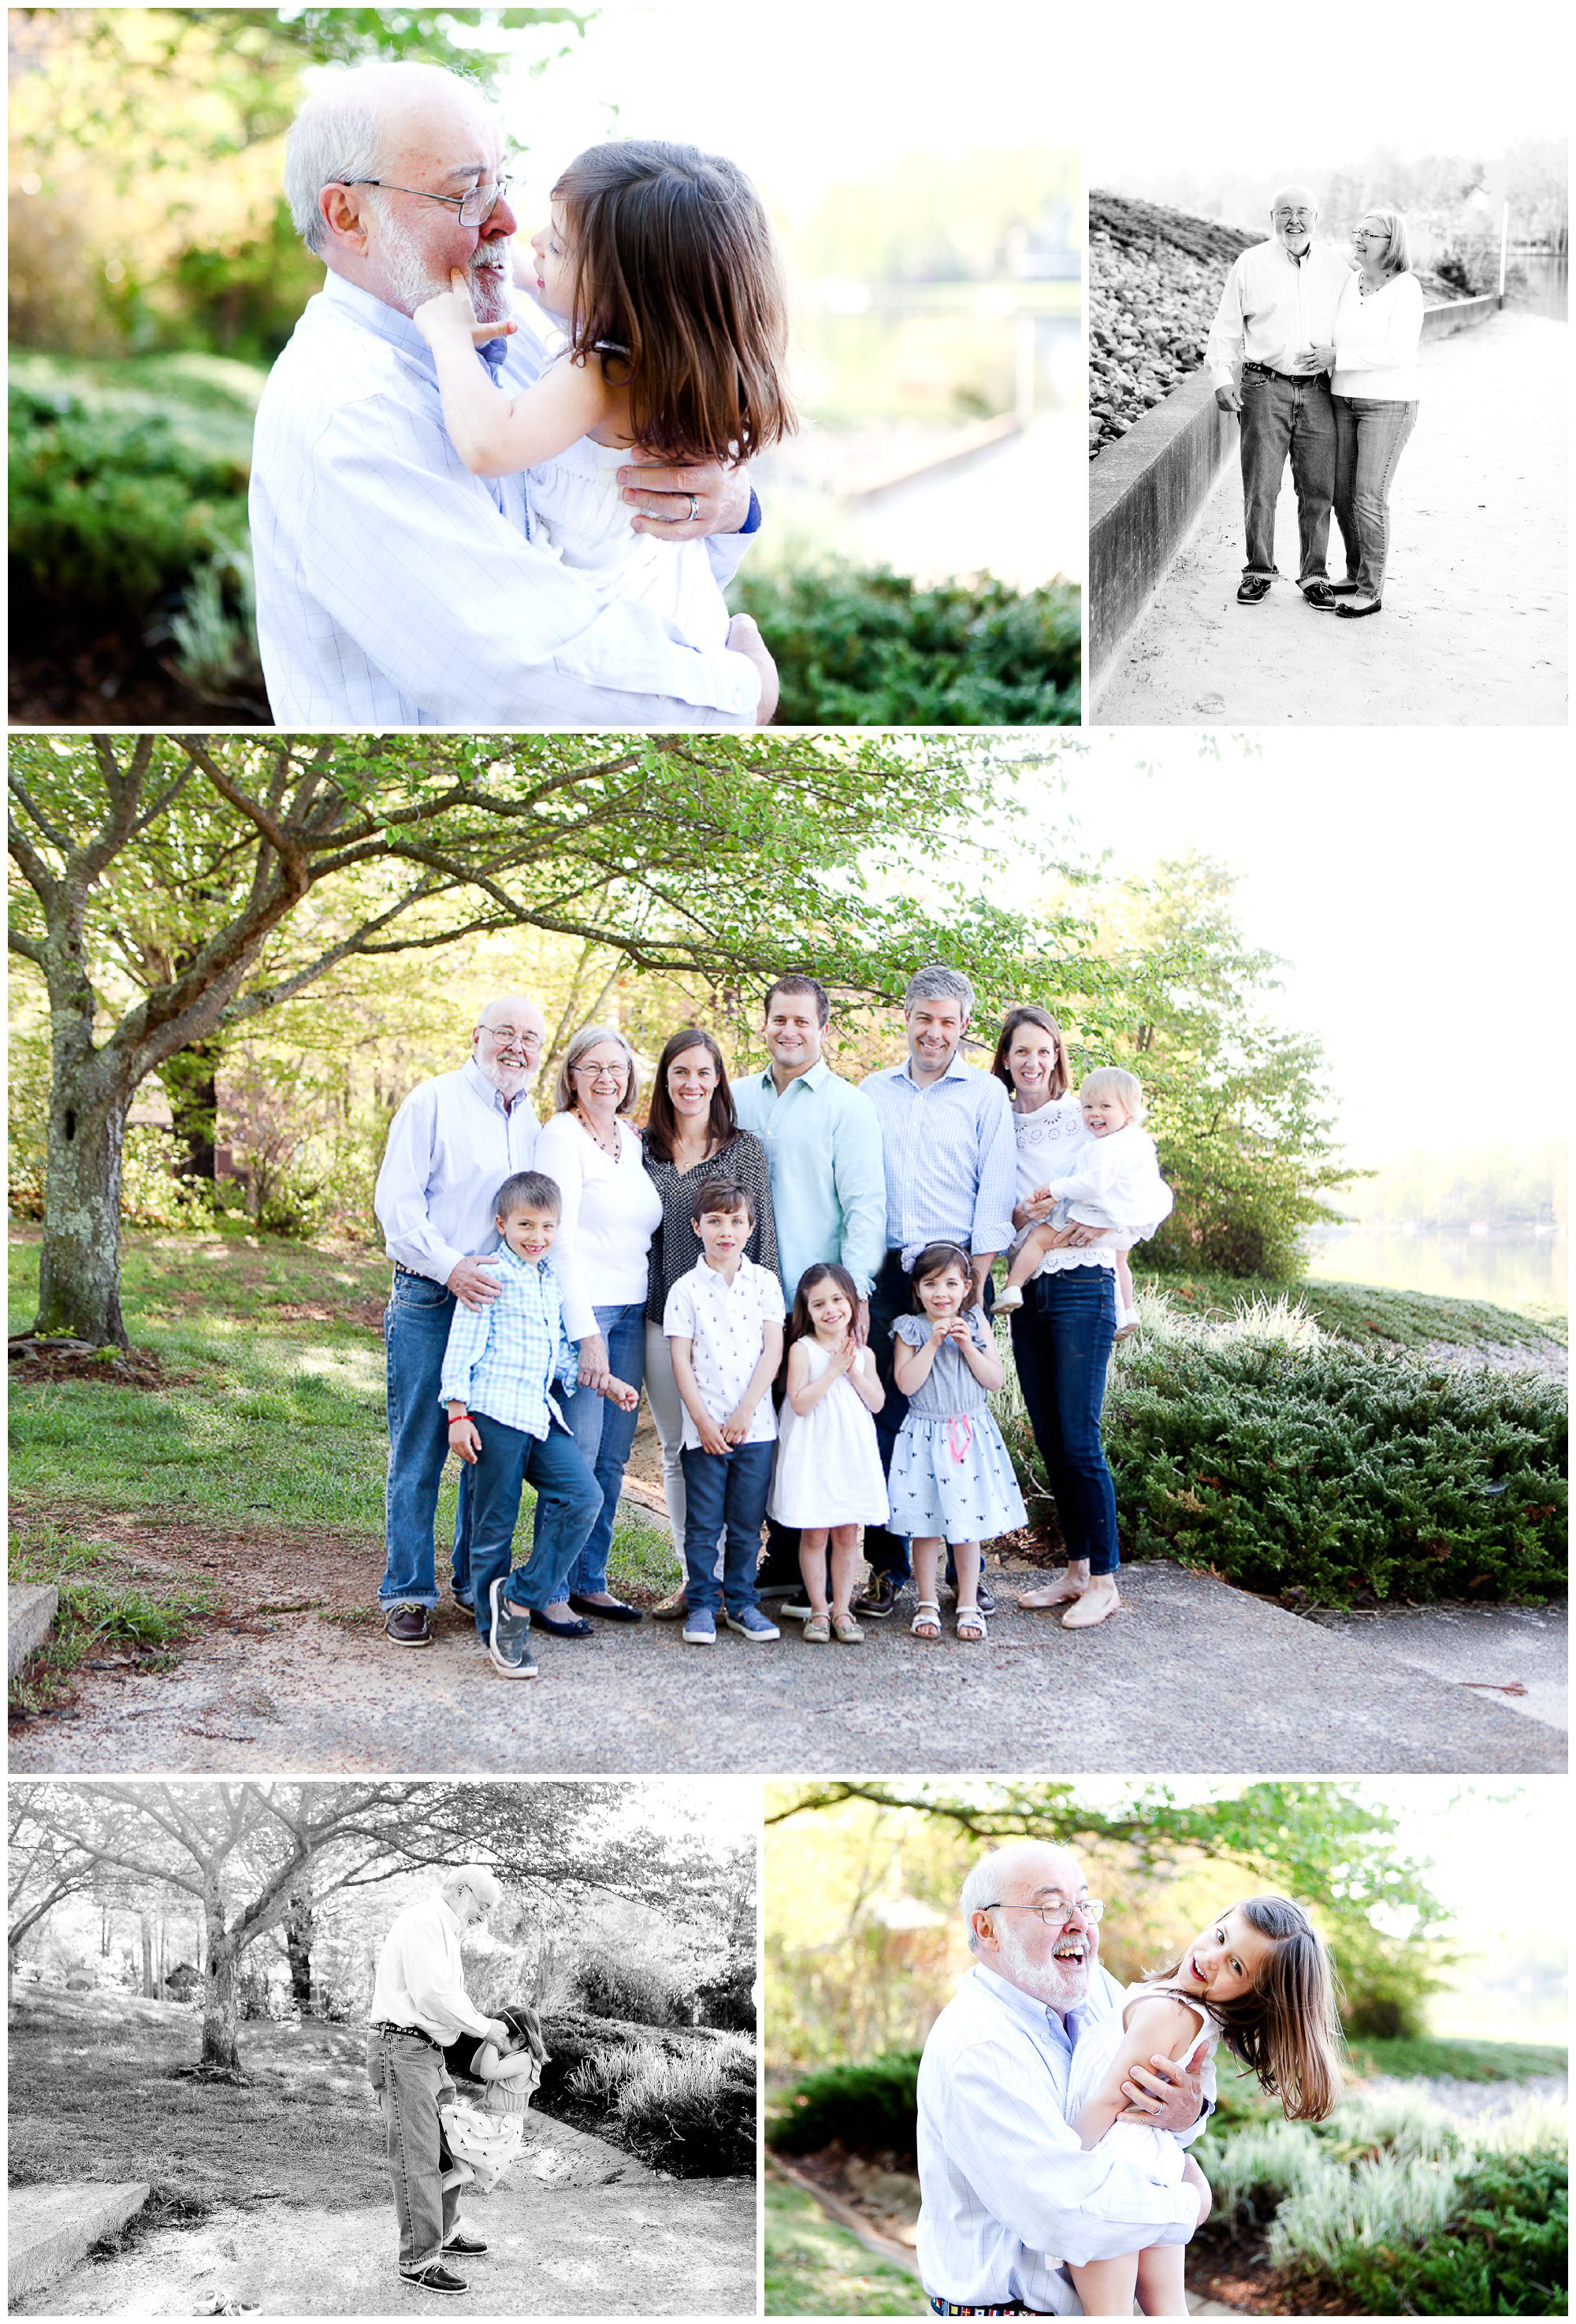 extended family grandparents cousins aunt uncle nephew niece portrait photography session lake beach spring love fun photographer charlottesville virginia